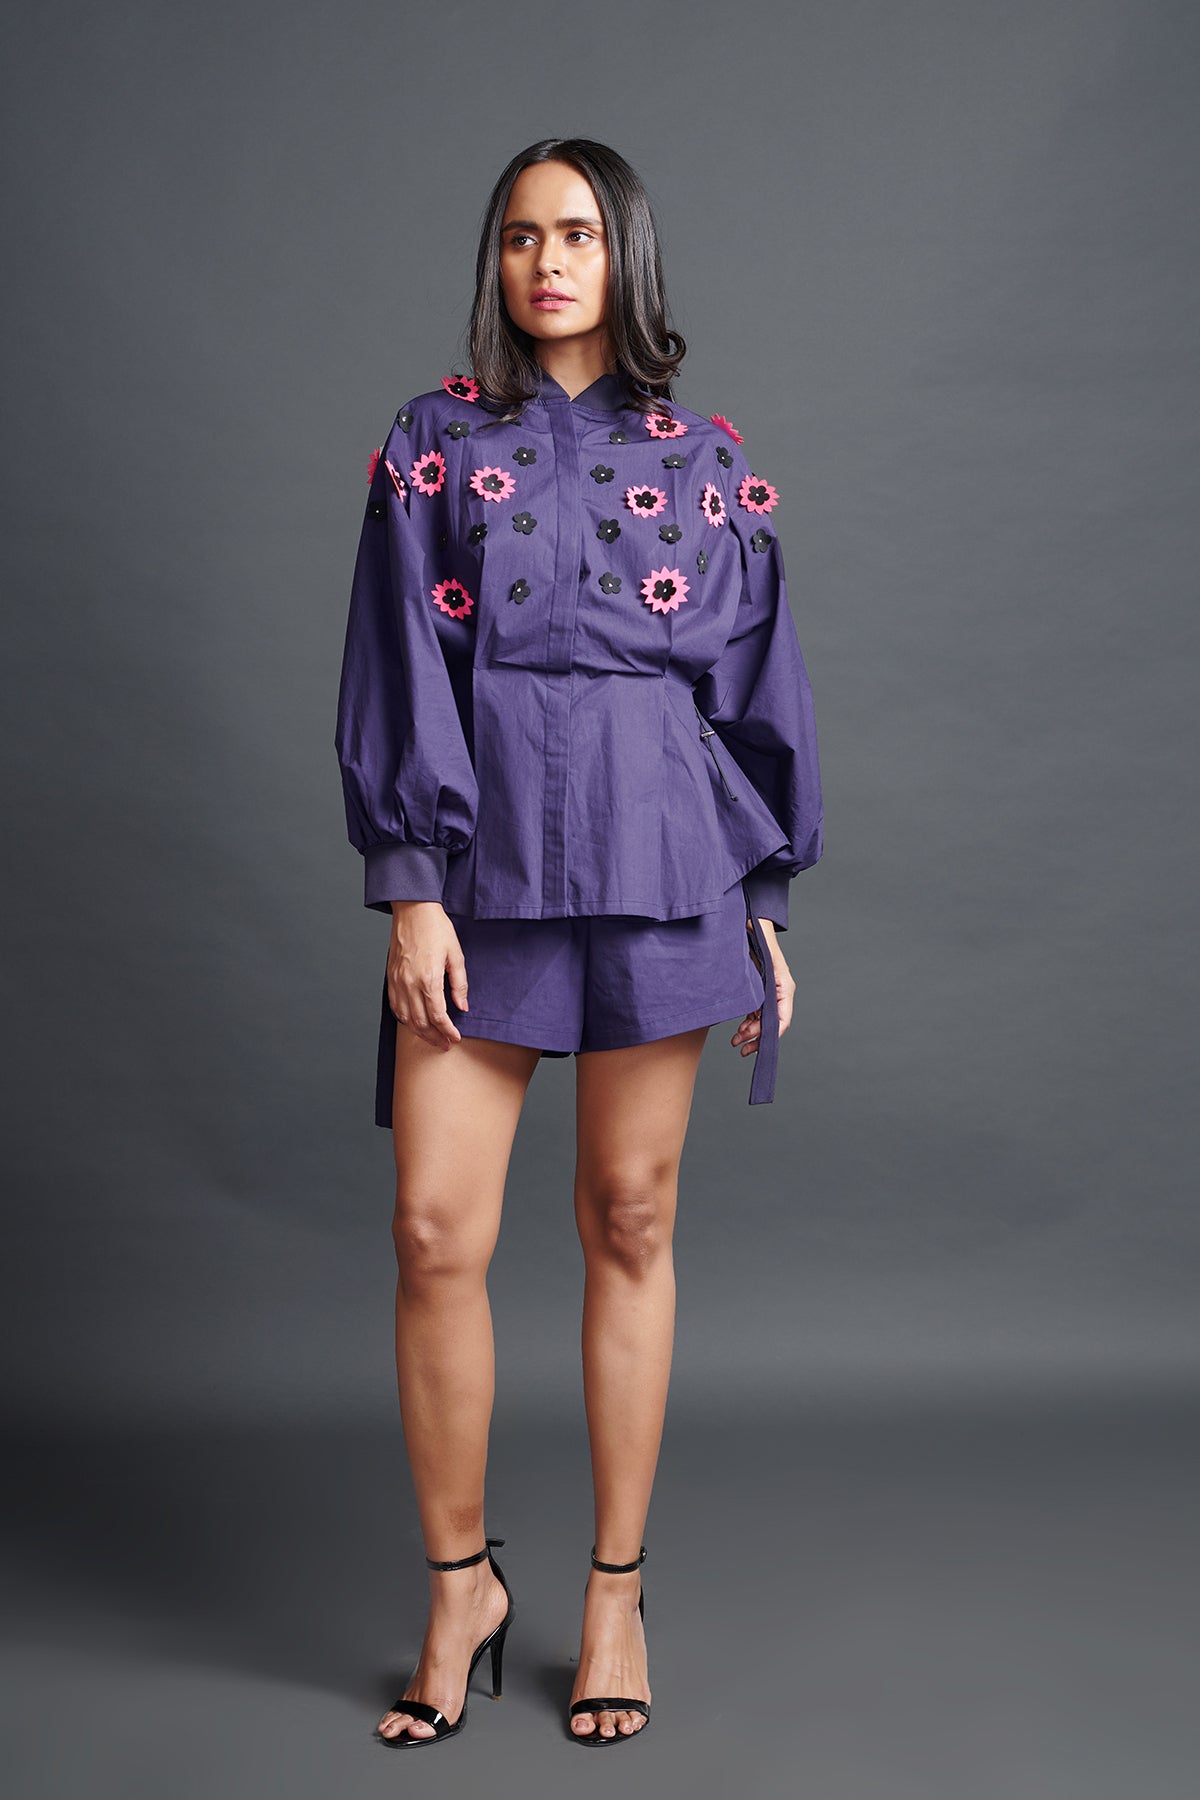 Image of PURPLE SHIRT IN COTTON BASE WITH PLEATED CONFETTI DETAIL. IT IS PAIRED WITH MATCHING SHORTS. From savoirfashions.com